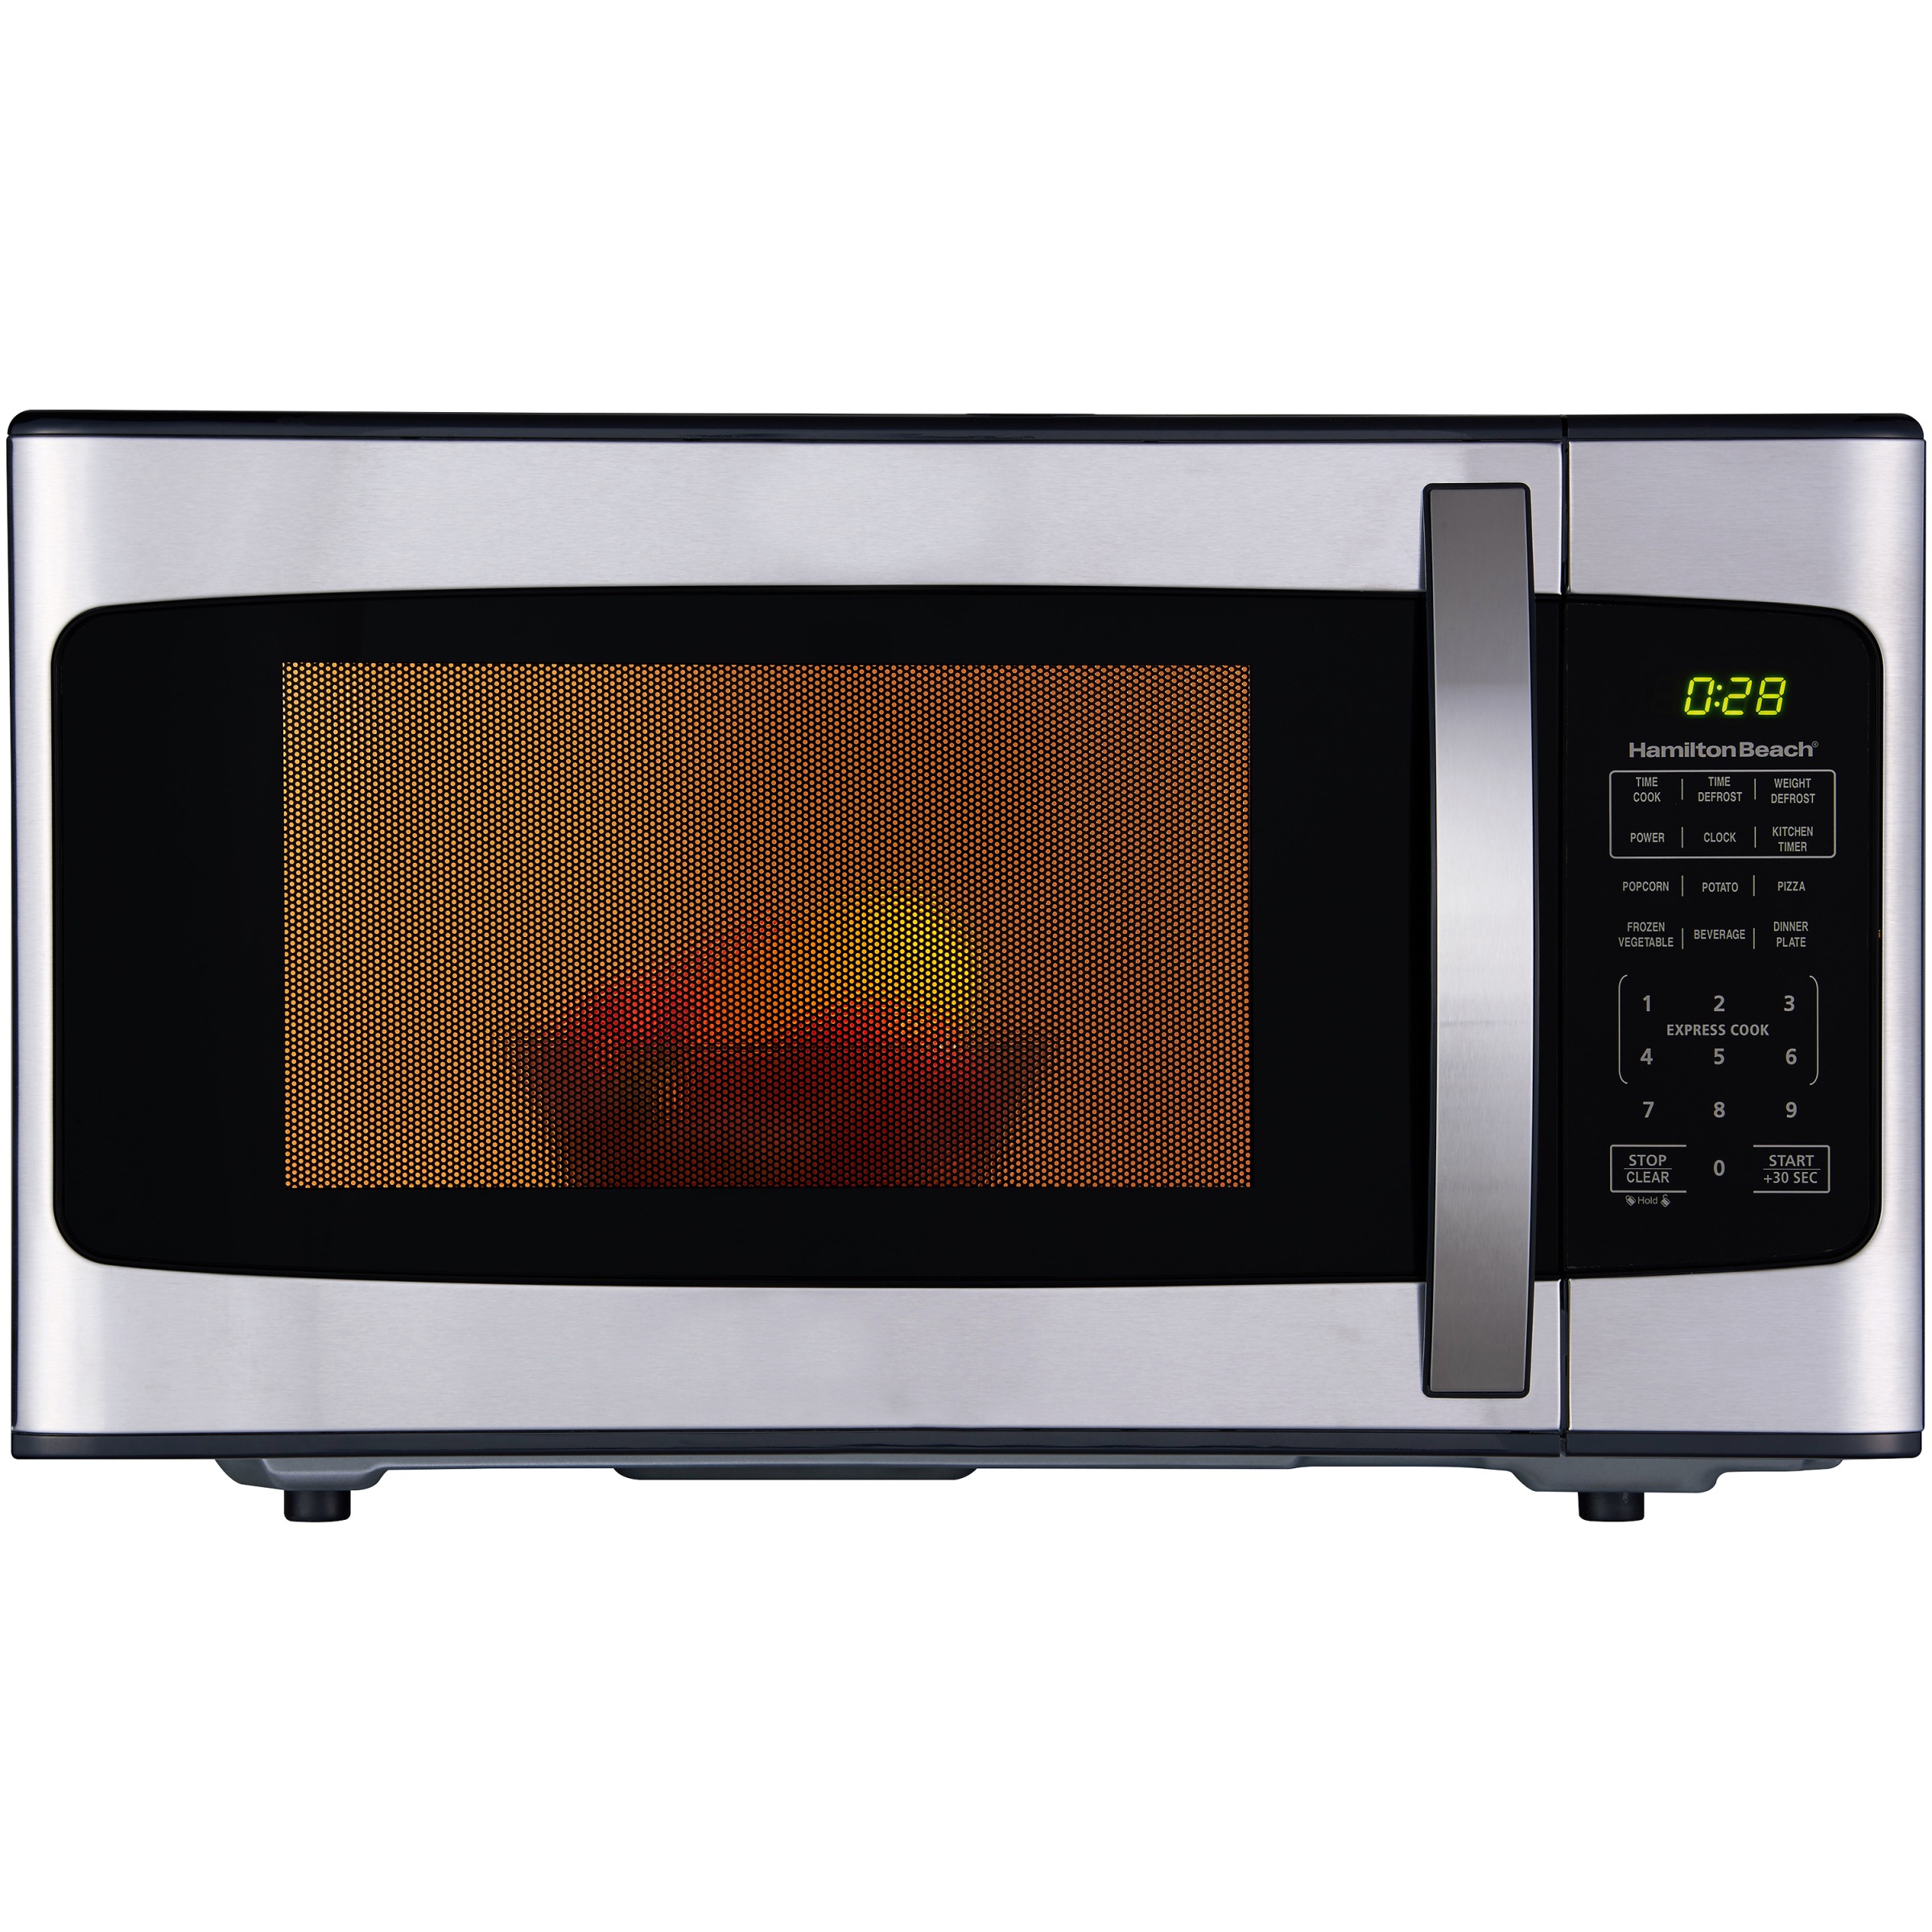 Hamilton Beach 1.1 Cu. Ft. 1000W Stainless Steel Microwave - image 3 of 6